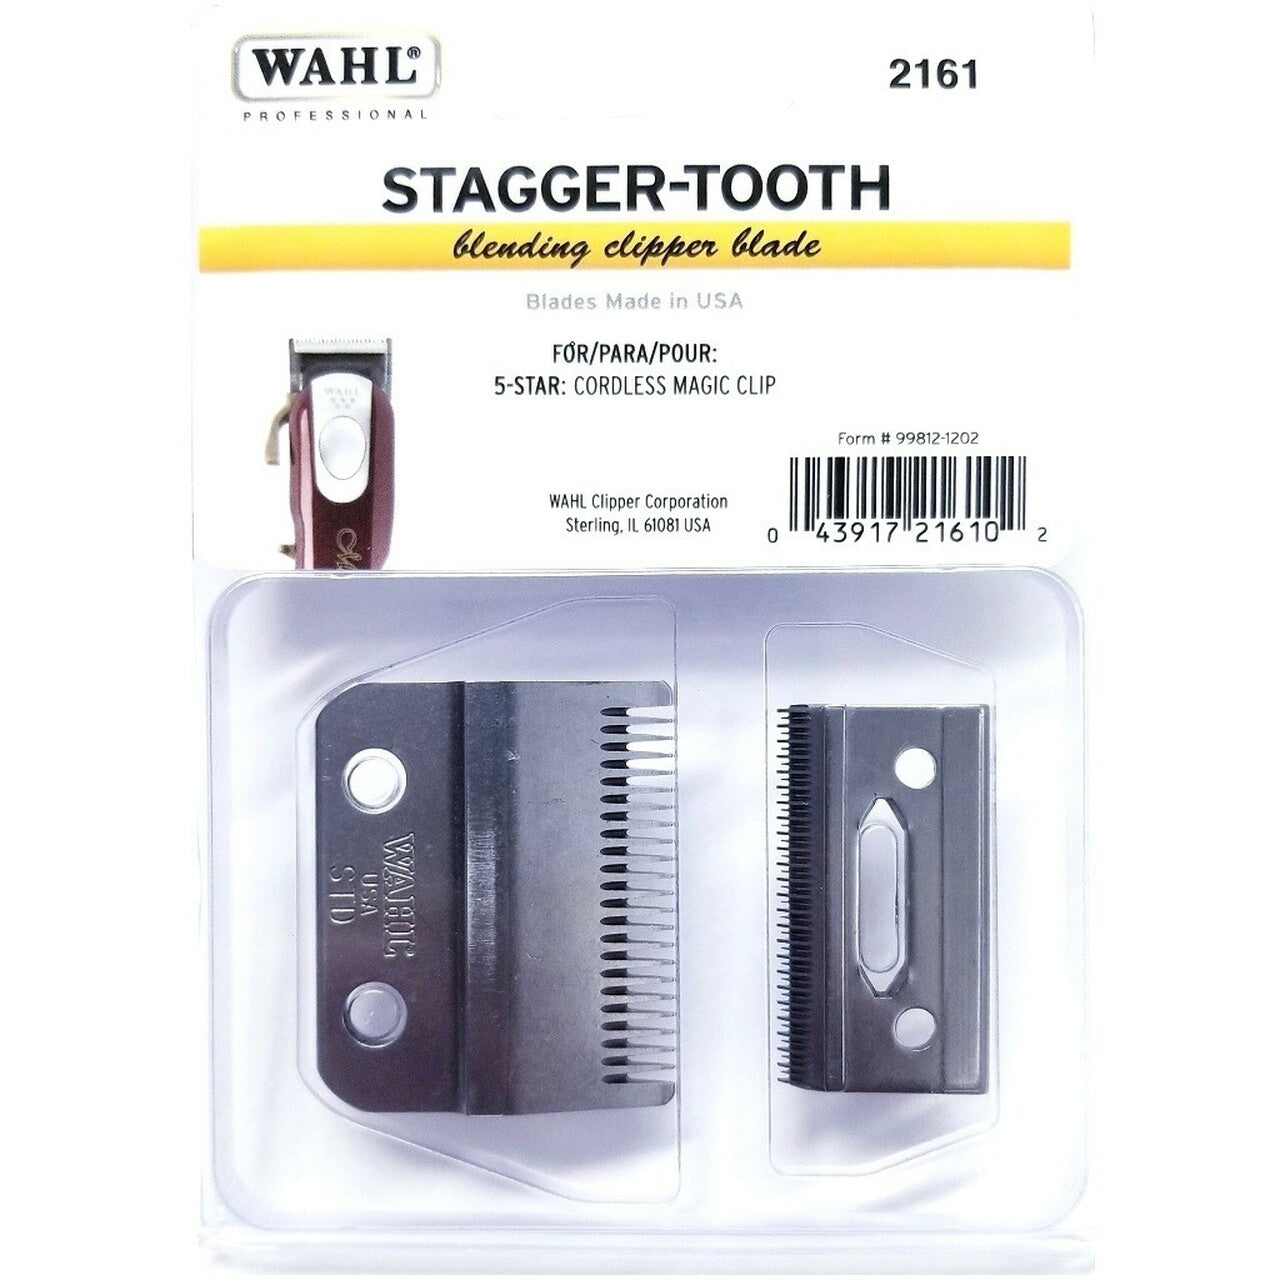 Wahl Professional Stagger-Tooth 2 Hole Clipper Blade #2161